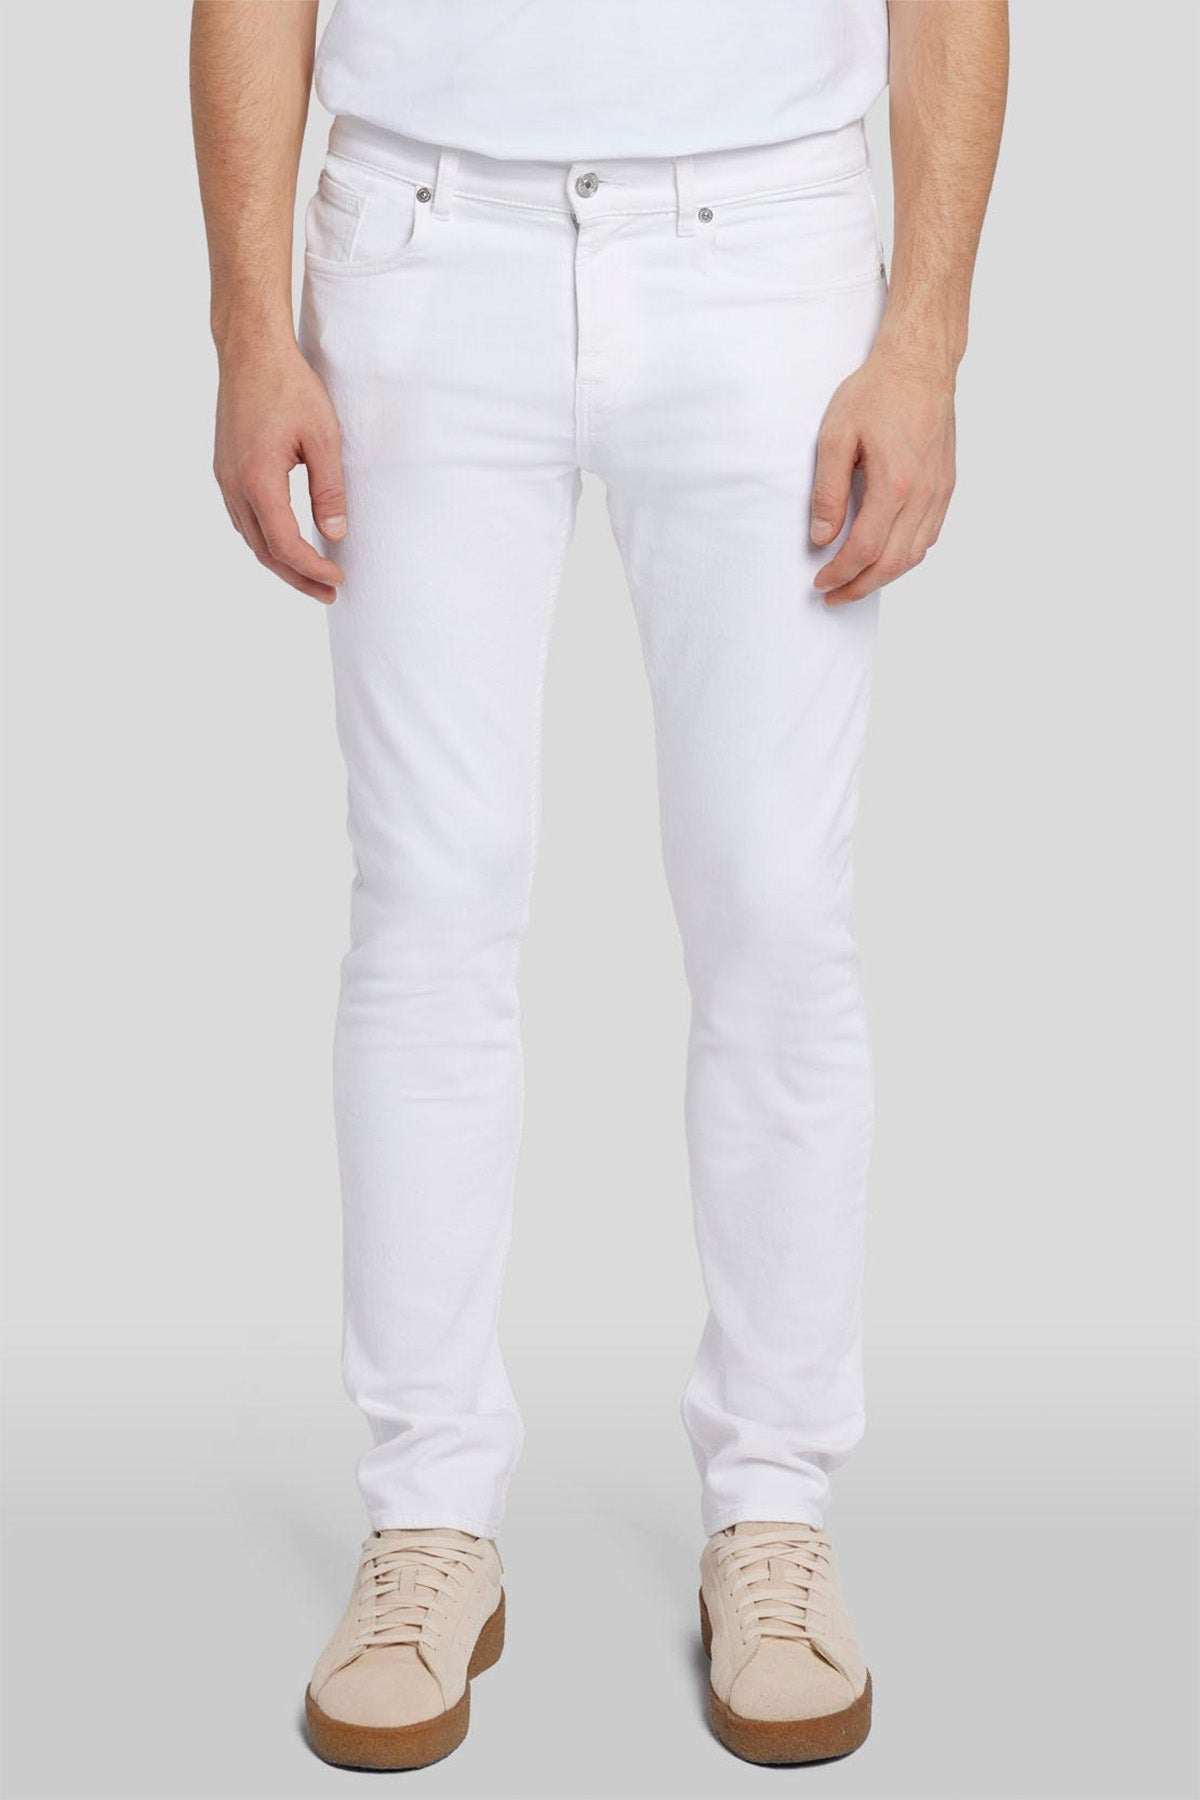 7 For All Mankind Slimmy Tapered Modern Slim Fit Jeans